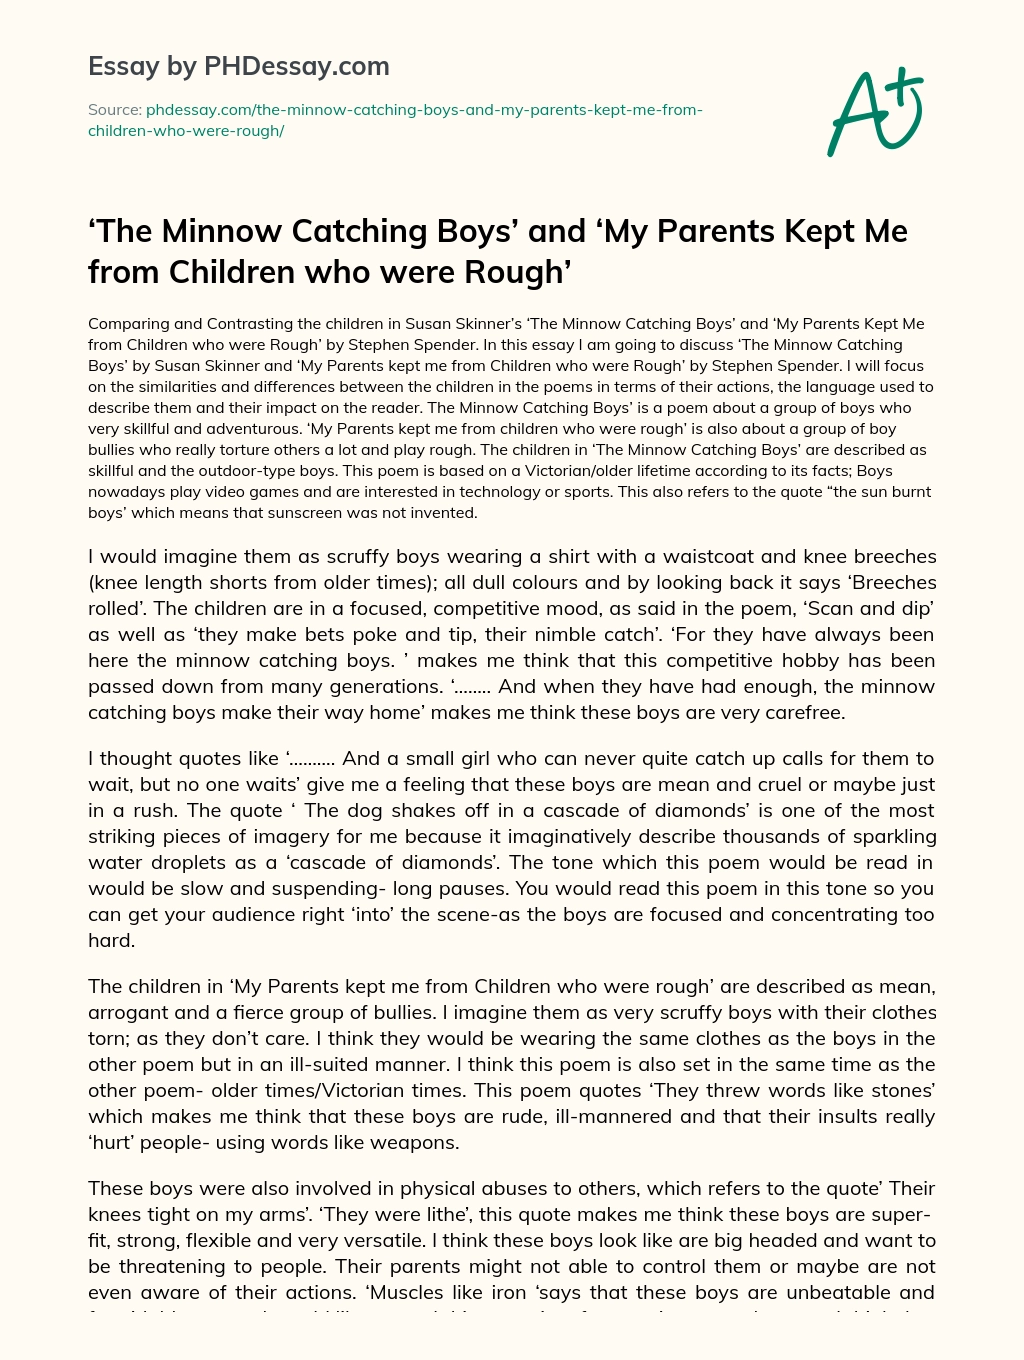 The Minnow Catching Boys and My Parents Kept Me from Children who were Rough essay